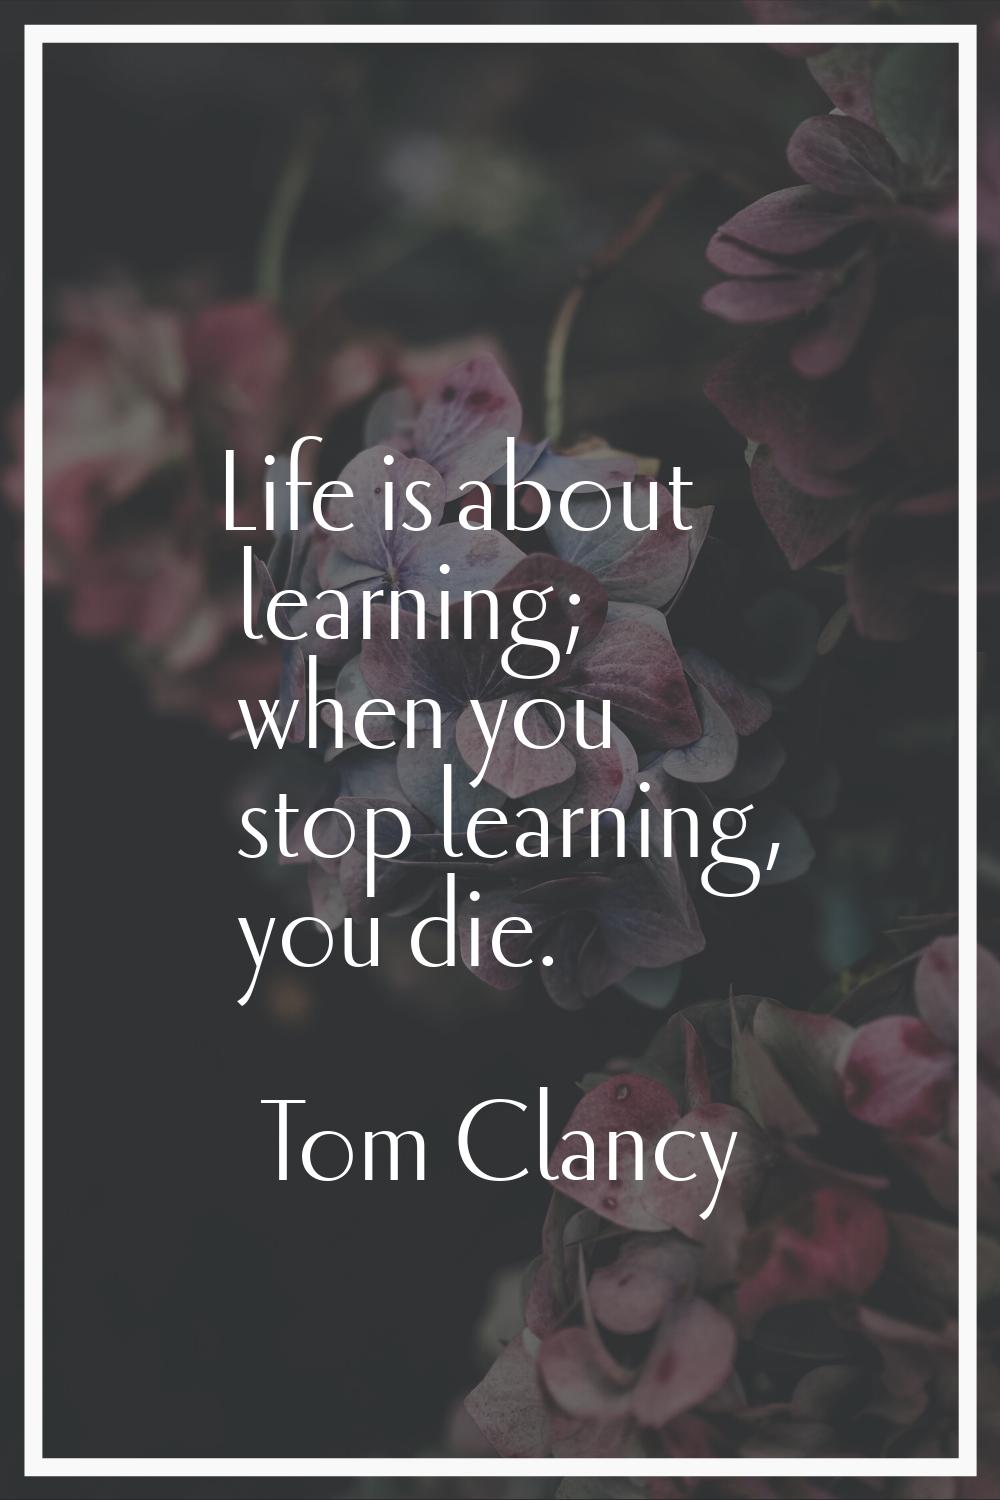 Life is about learning; when you stop learning, you die.